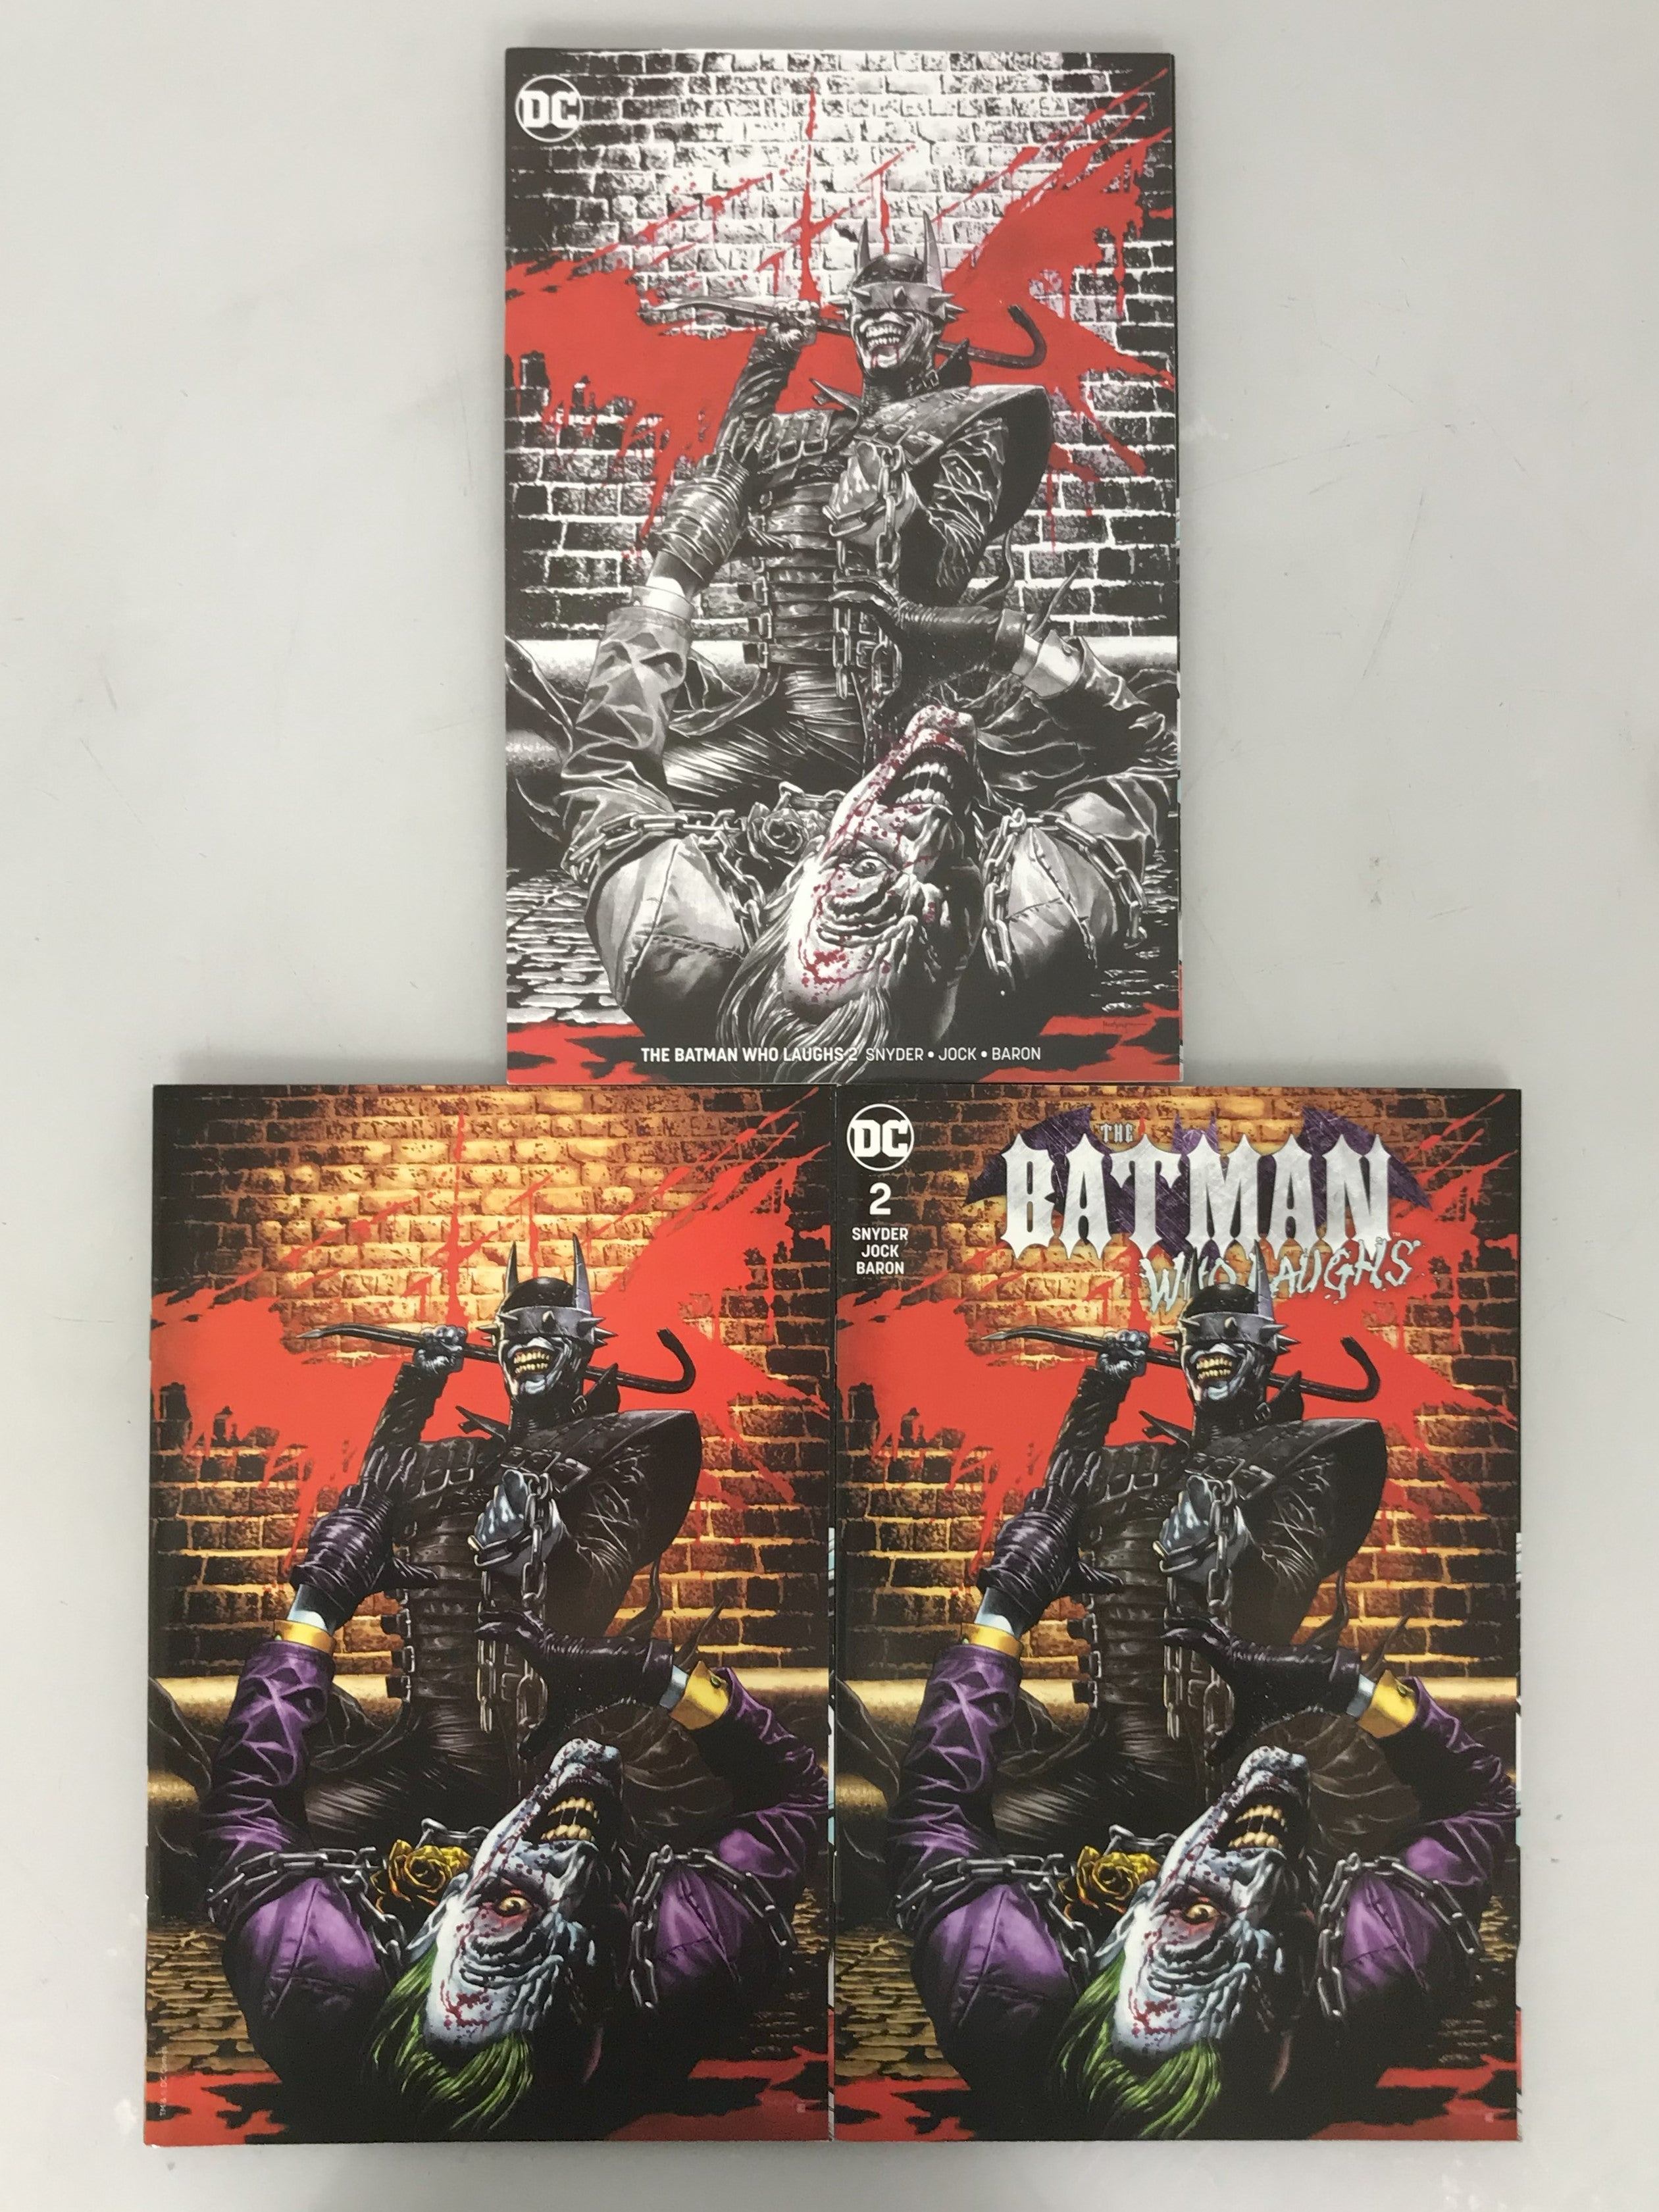 Lot of 3 The Batman Who Laughs 2 2019 Variant Covers Suayan Baron